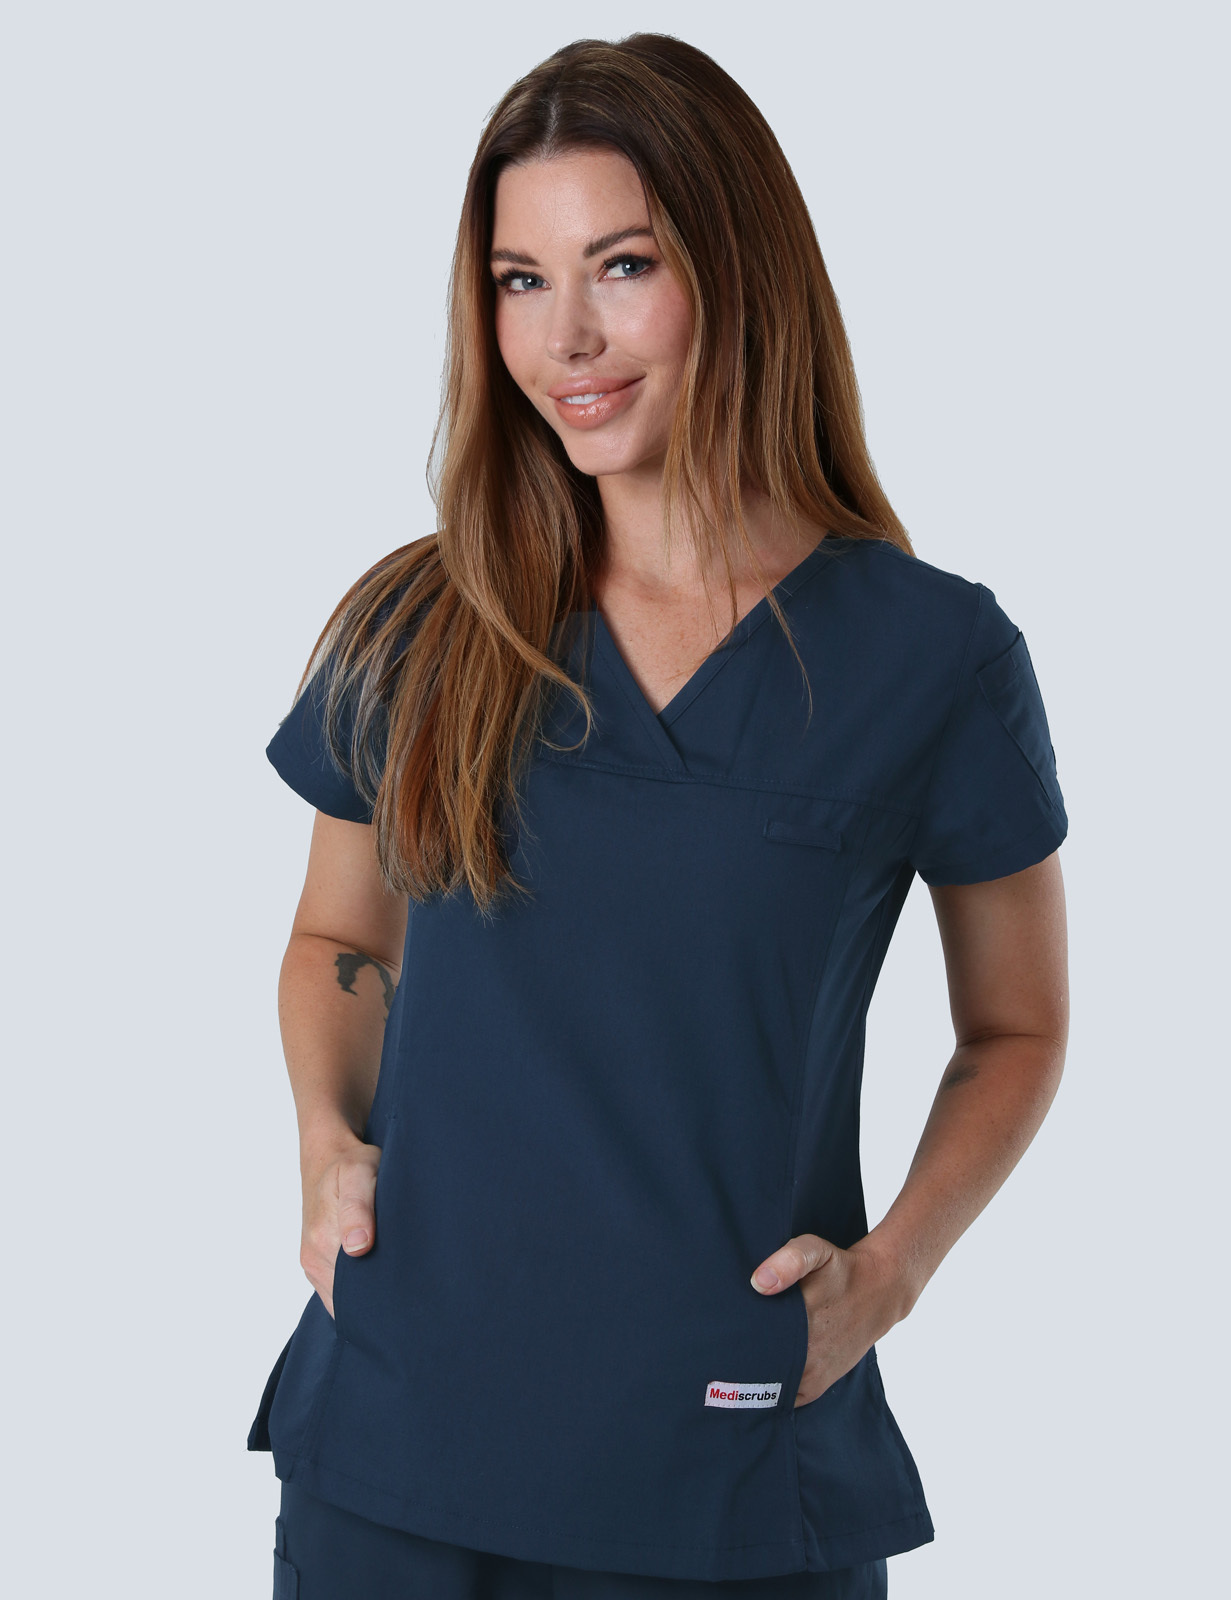 Gladstone Hospital - ED RN (Women's Fit Solid Scrub Top in Navy incl Logos)